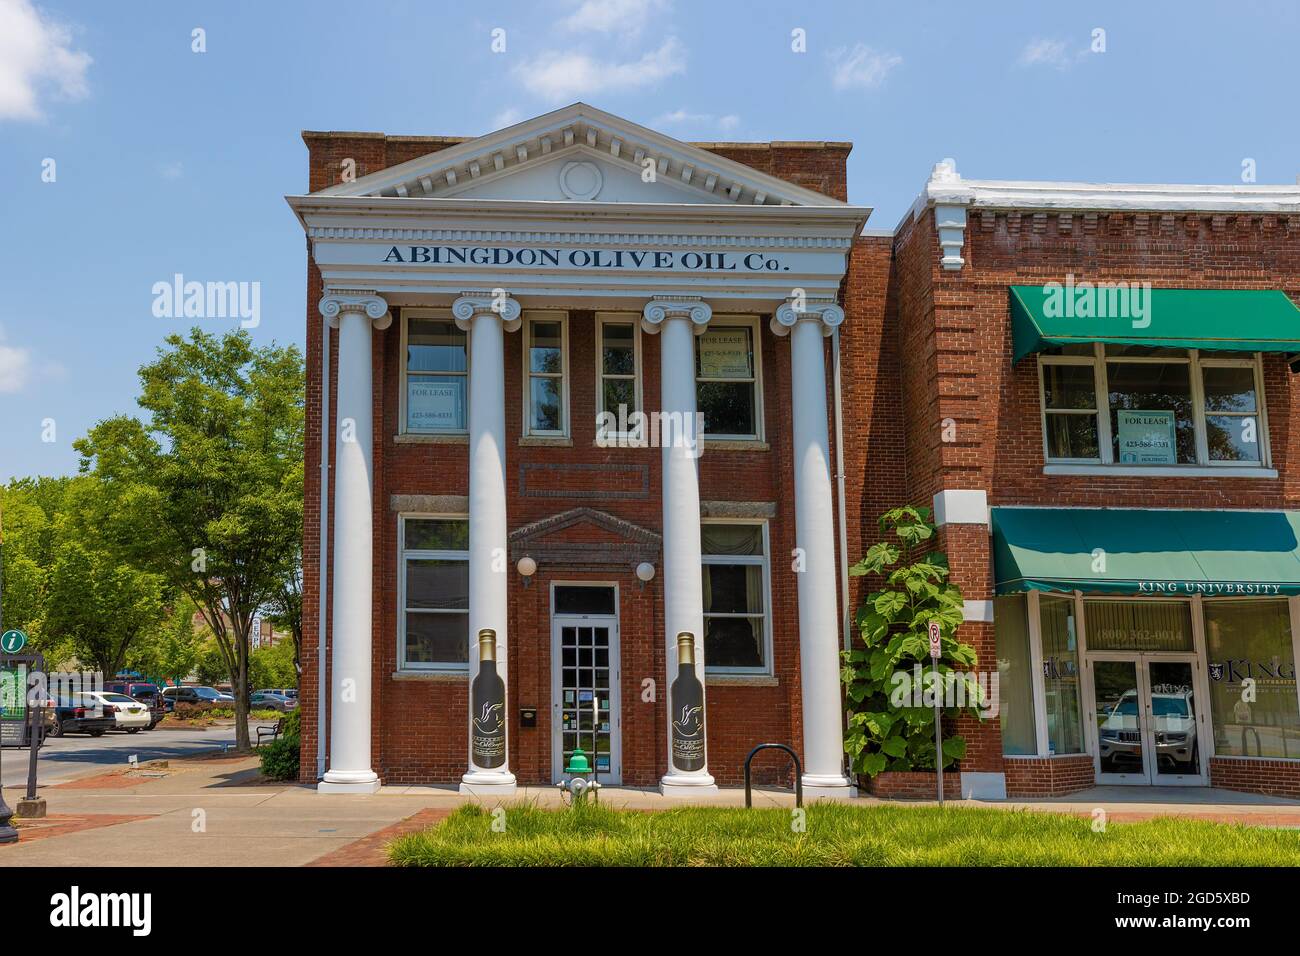 Kingport, Tennessee, USA - July 4, 2021:  Build int 1912 this bank was declared 'insolvent' during the great depression in 1929.  It now is an olive o Stock Photo